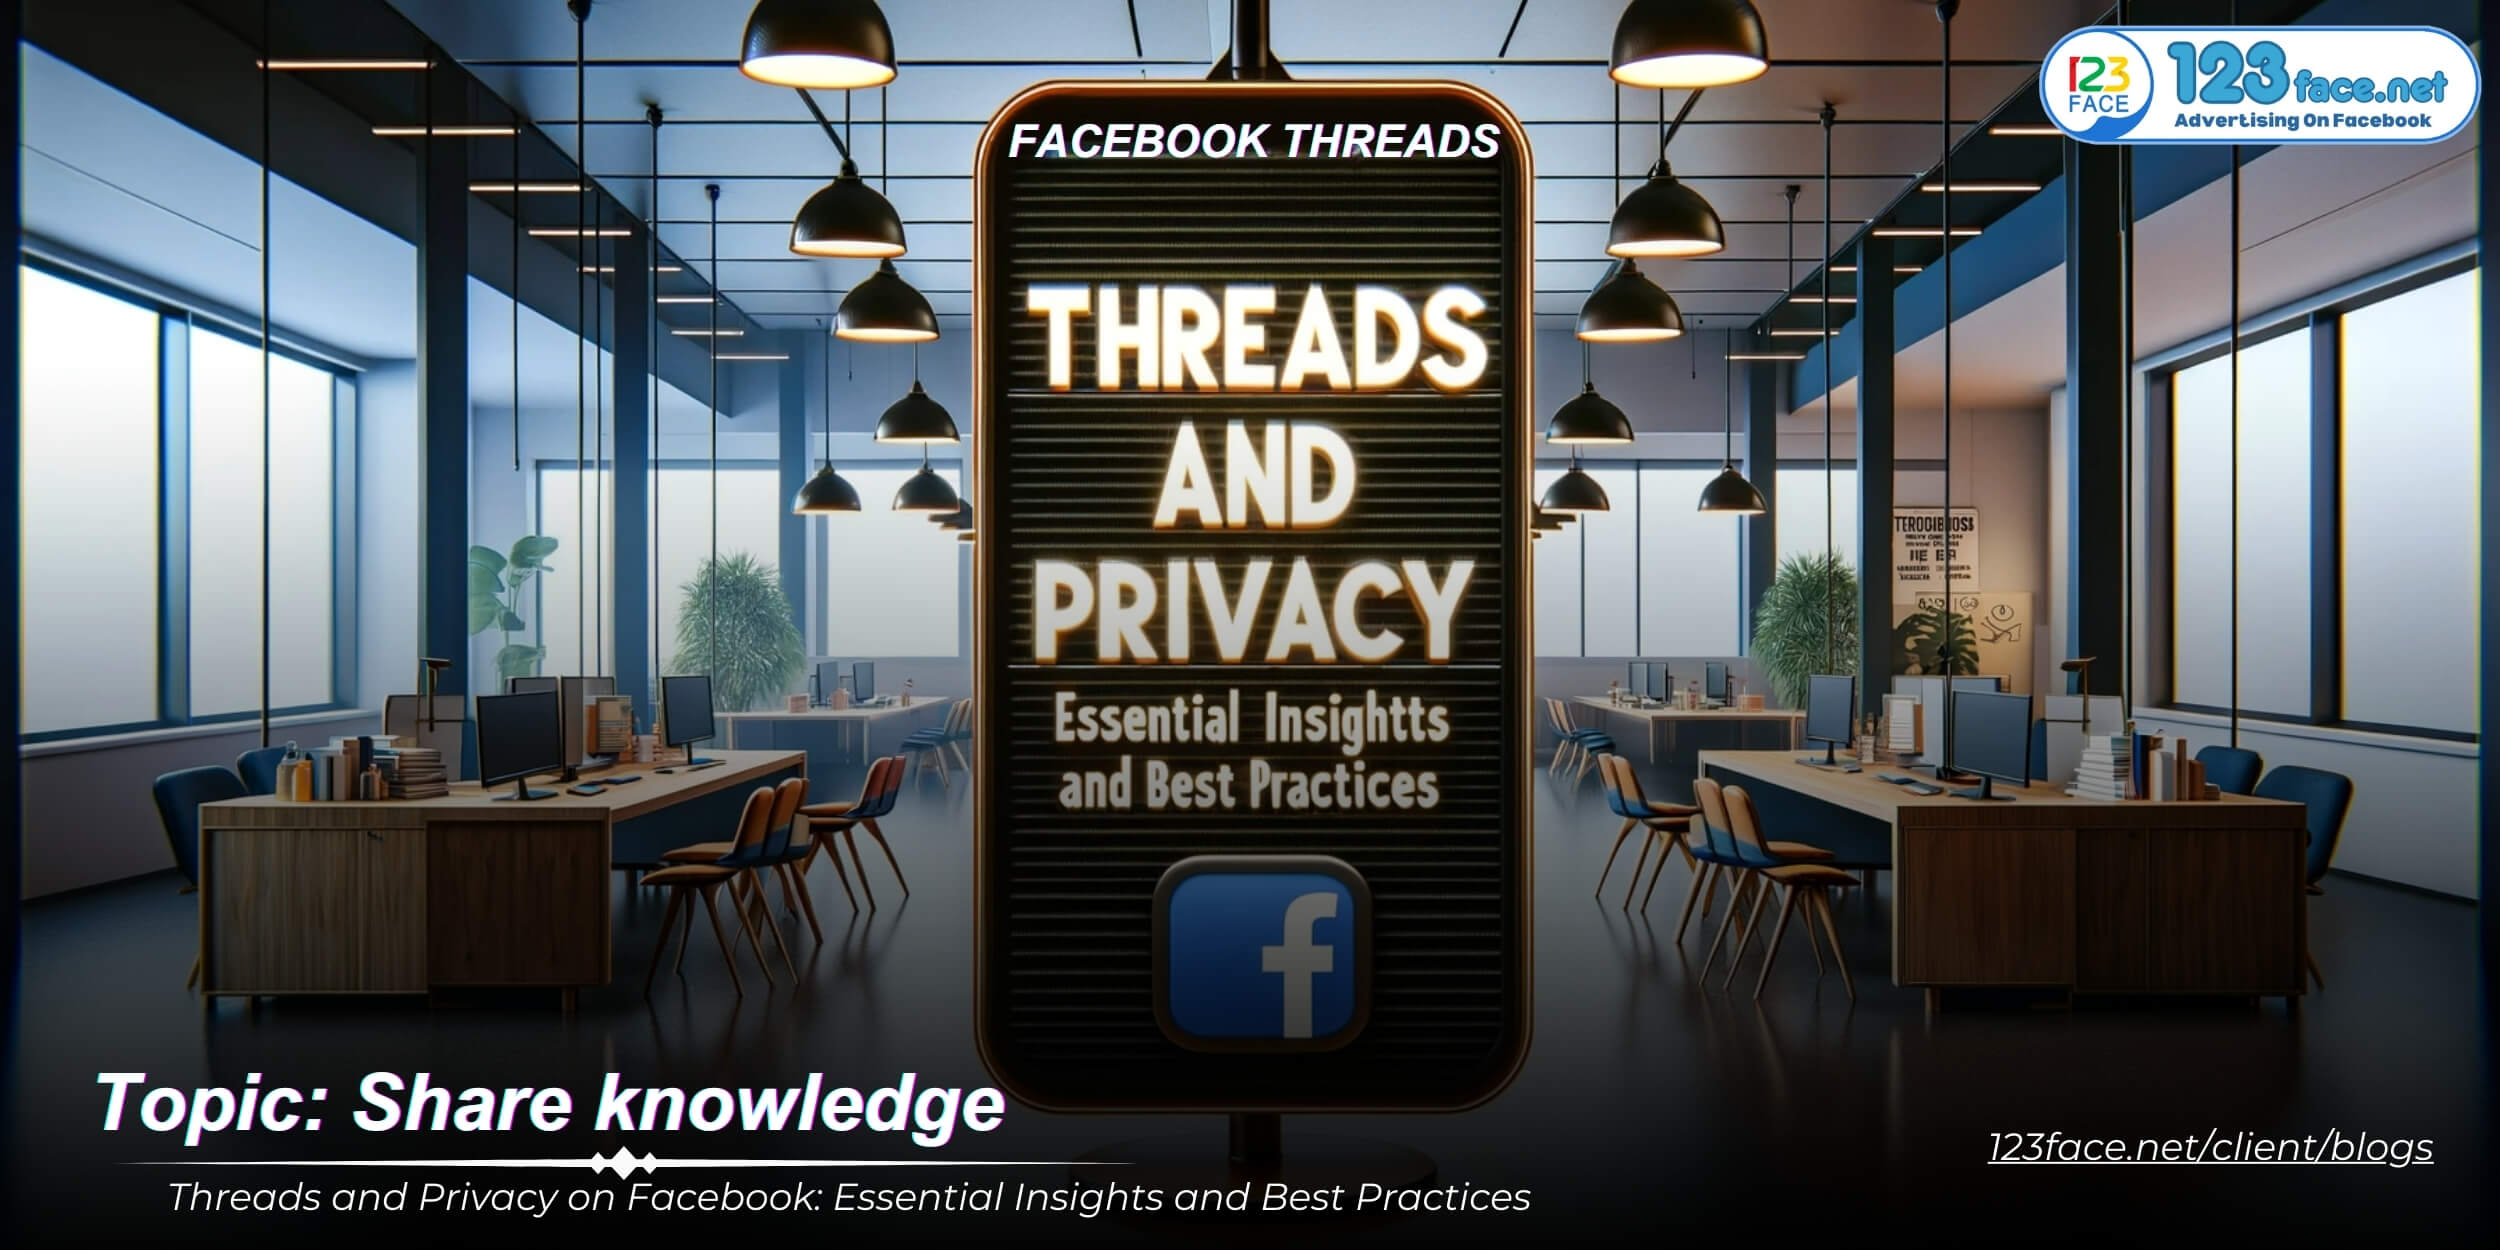 Threads and Privacy on Facebook: Essential Insights and Best Practices